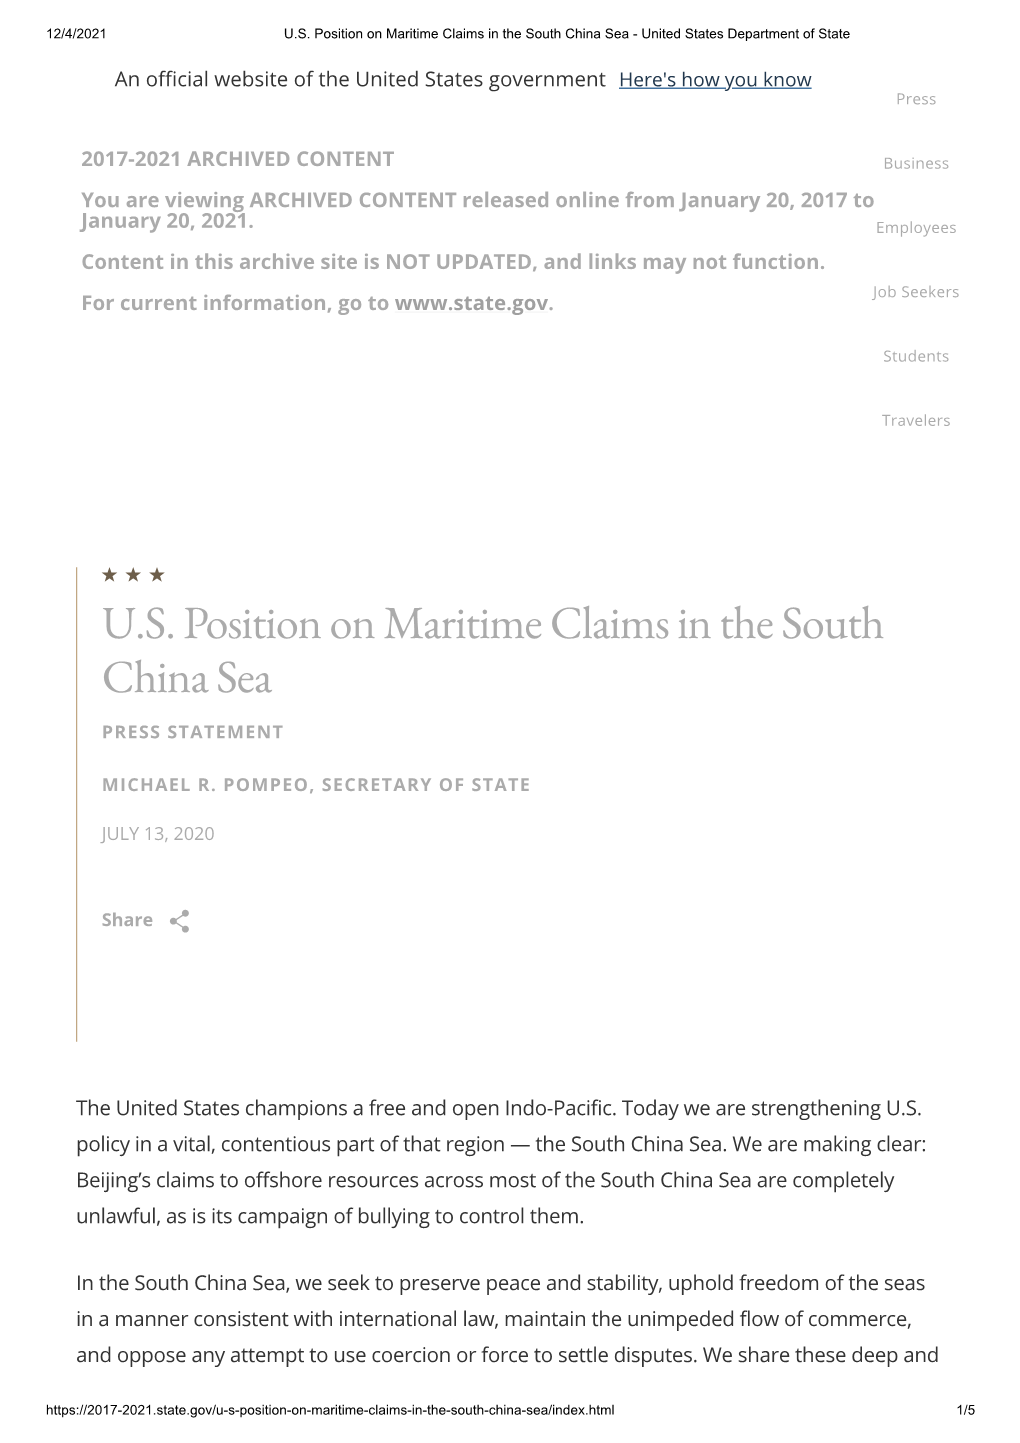 U.S. Position on Maritime Claims in the South China Sea - United States Department of State